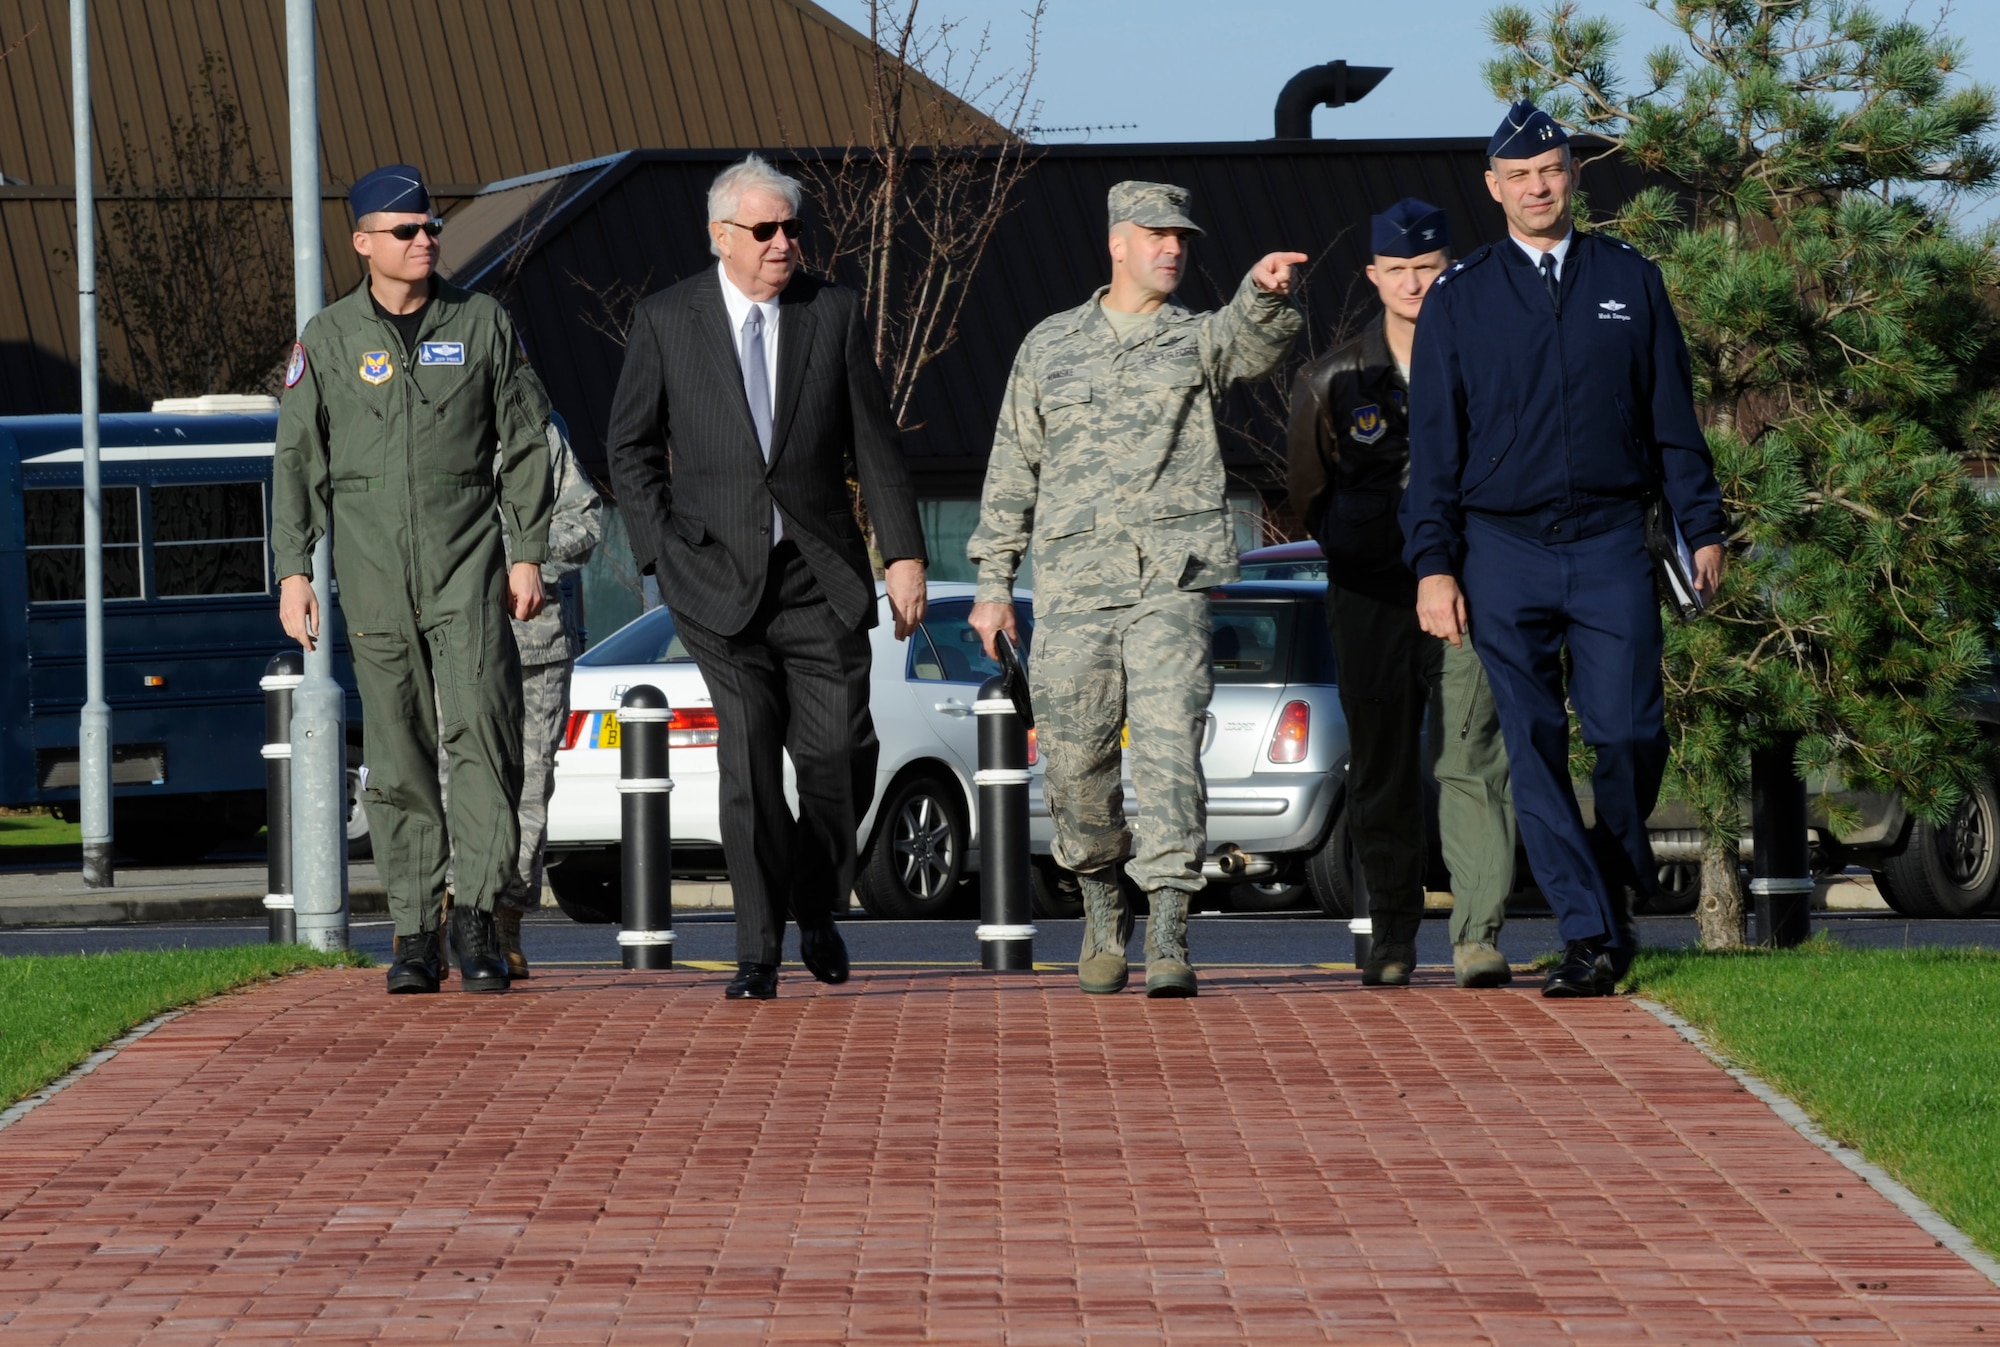 RAF MILDENHALL, England -- U.S. ambassador to the U.K. Louis Susman (second from the left) walks with Maj. Gen. Mark Zamzow, 3rd Air Force vice commander (right), Col. Chad Manske, 100th Air Refueling Wing commander (Second from the right), and Lt. Col. Jeff Price, air attache (left), during the ambassador’s visit to the base Nov. 12.  During the visit, Ambassador Susman toured the control tower, a KC-135 Stratotanker, and presented awards to various individuals.  (U.S. Air Force photo/Staff Sgt. Christopher L. Ingersoll)